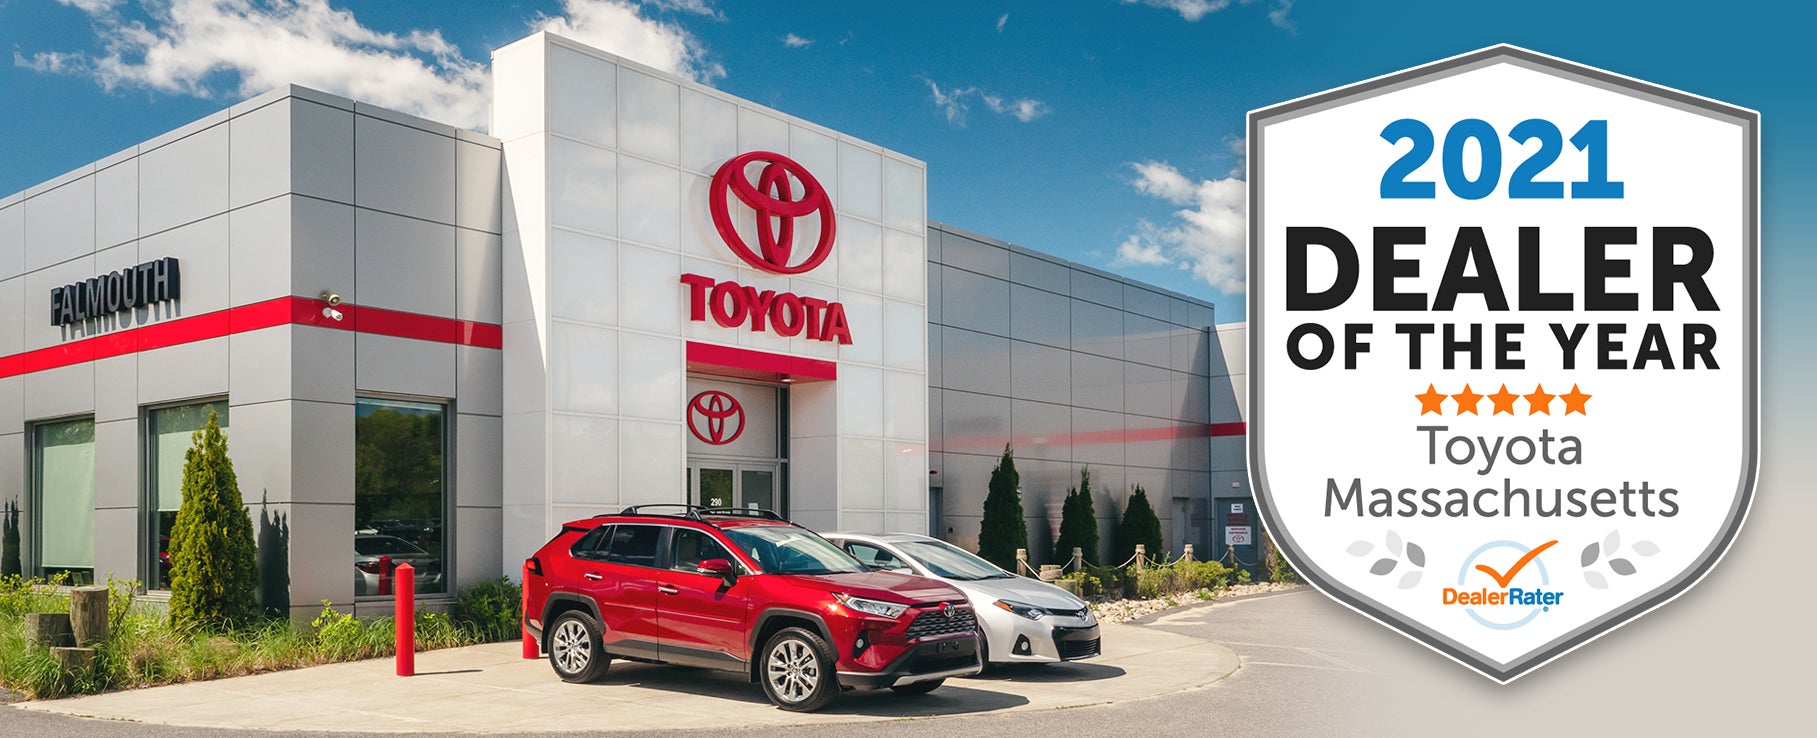 Falmouth Toyota is the 2021 Toyota Dealer Of The Year in Massachusetts